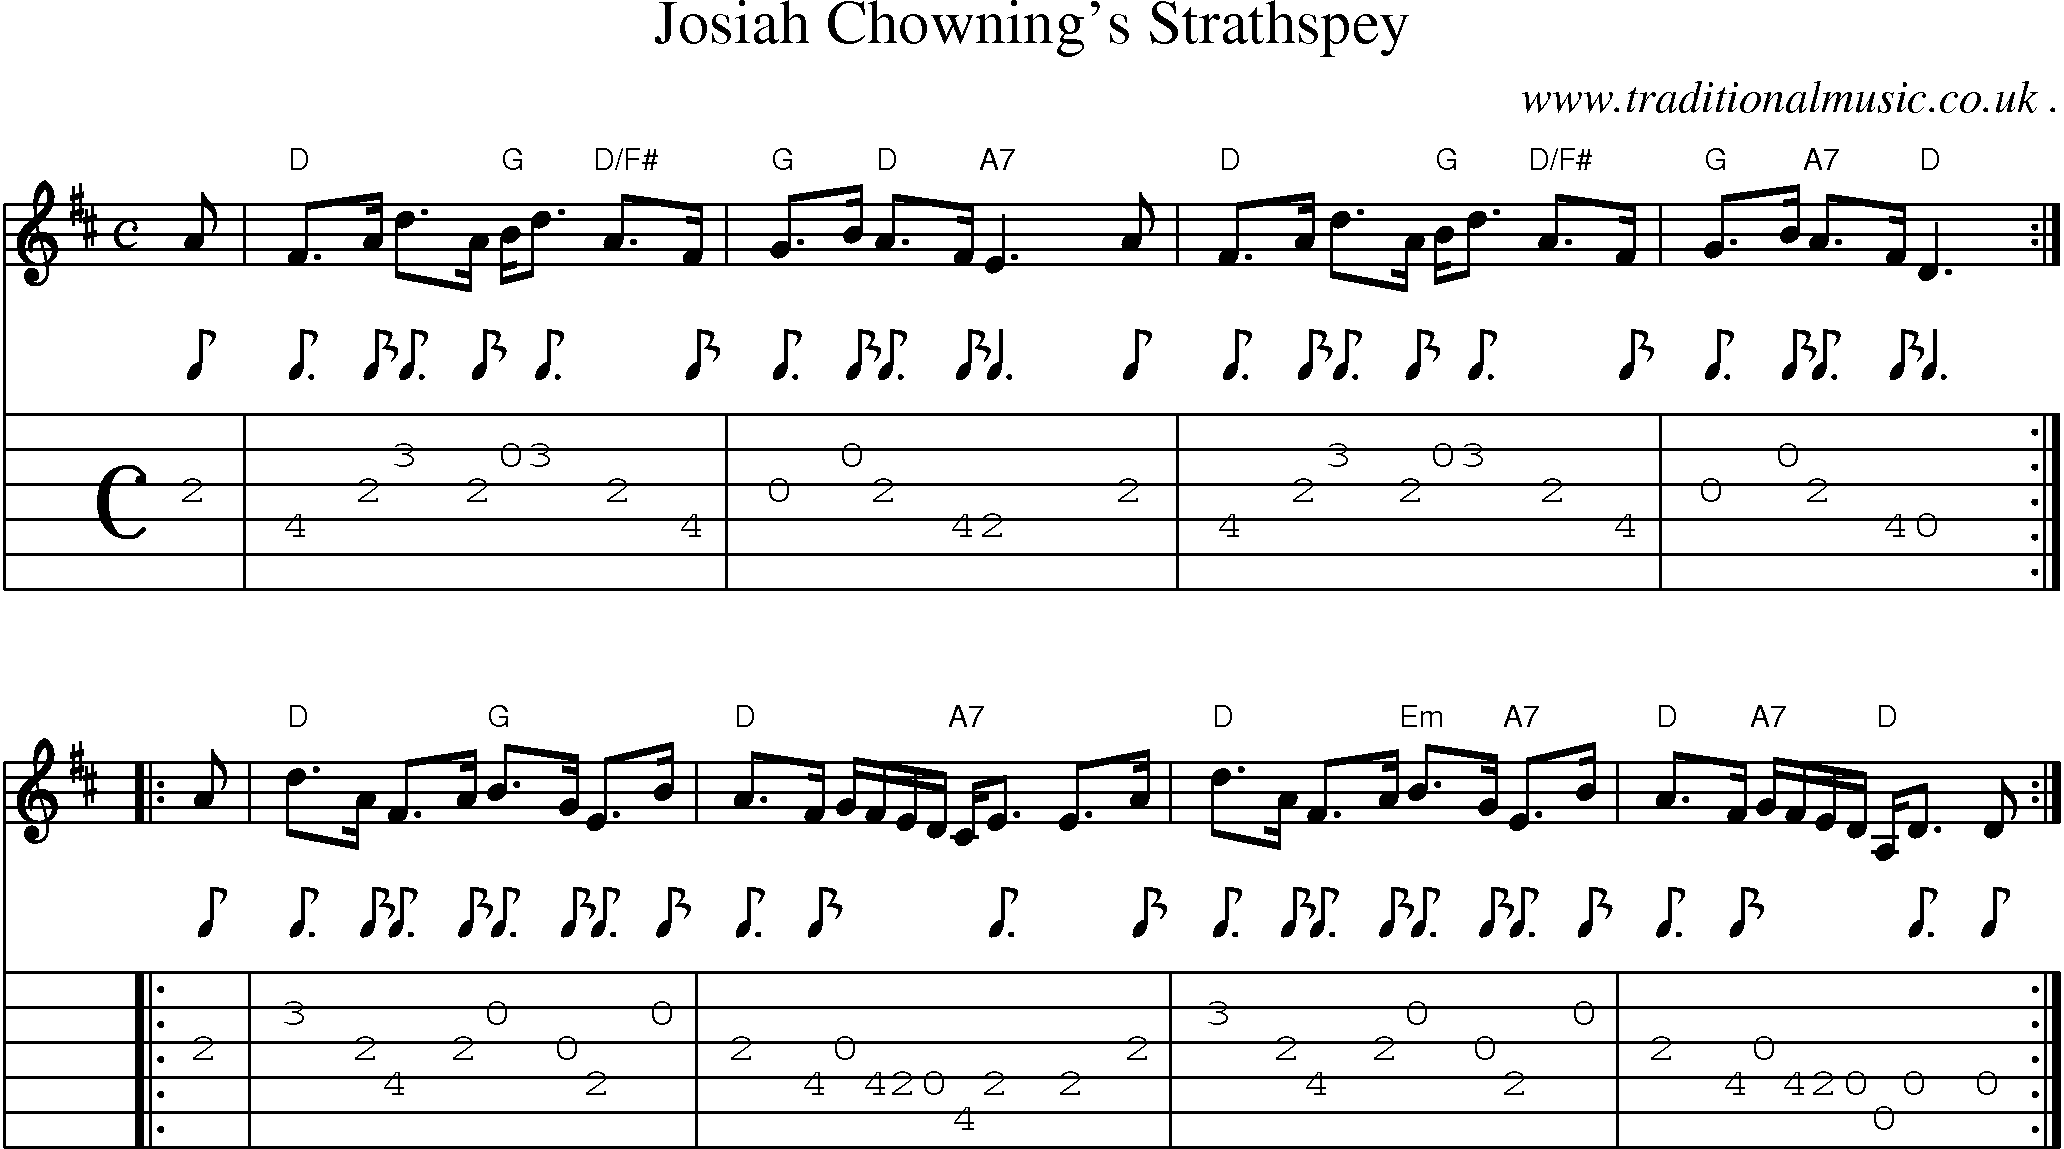 Sheet-music  score, Chords and Guitar Tabs for Josiah Chownings Strathspey